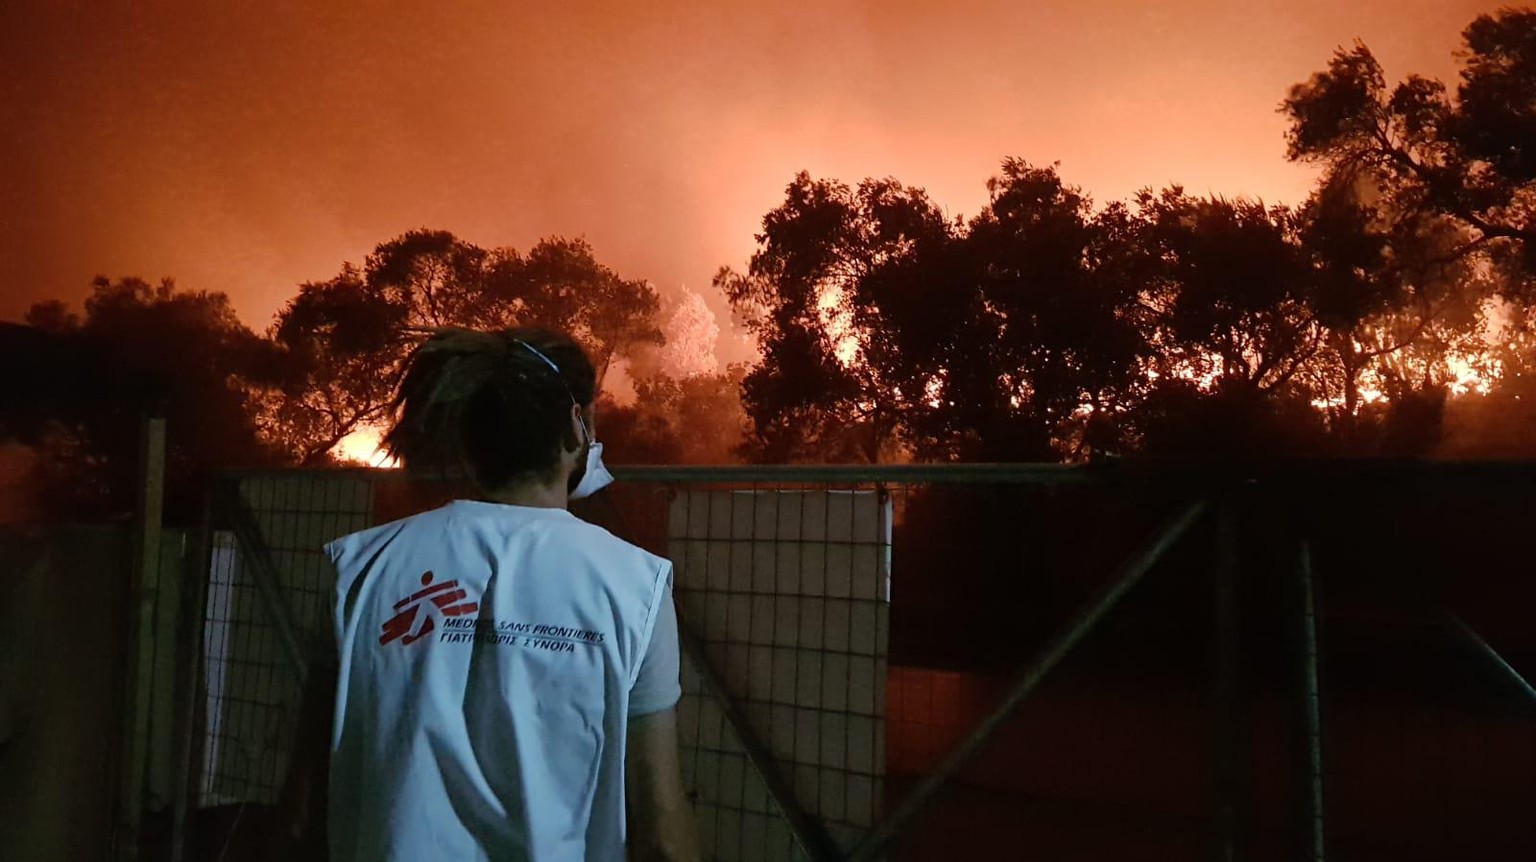 Yesterday night fire erupted in Moria, Lesbos, burning to the ground the entire camp and forcing 12000 people to evacuate the site. They are all on the streets now with no place to stay. &quot;We saw  ...